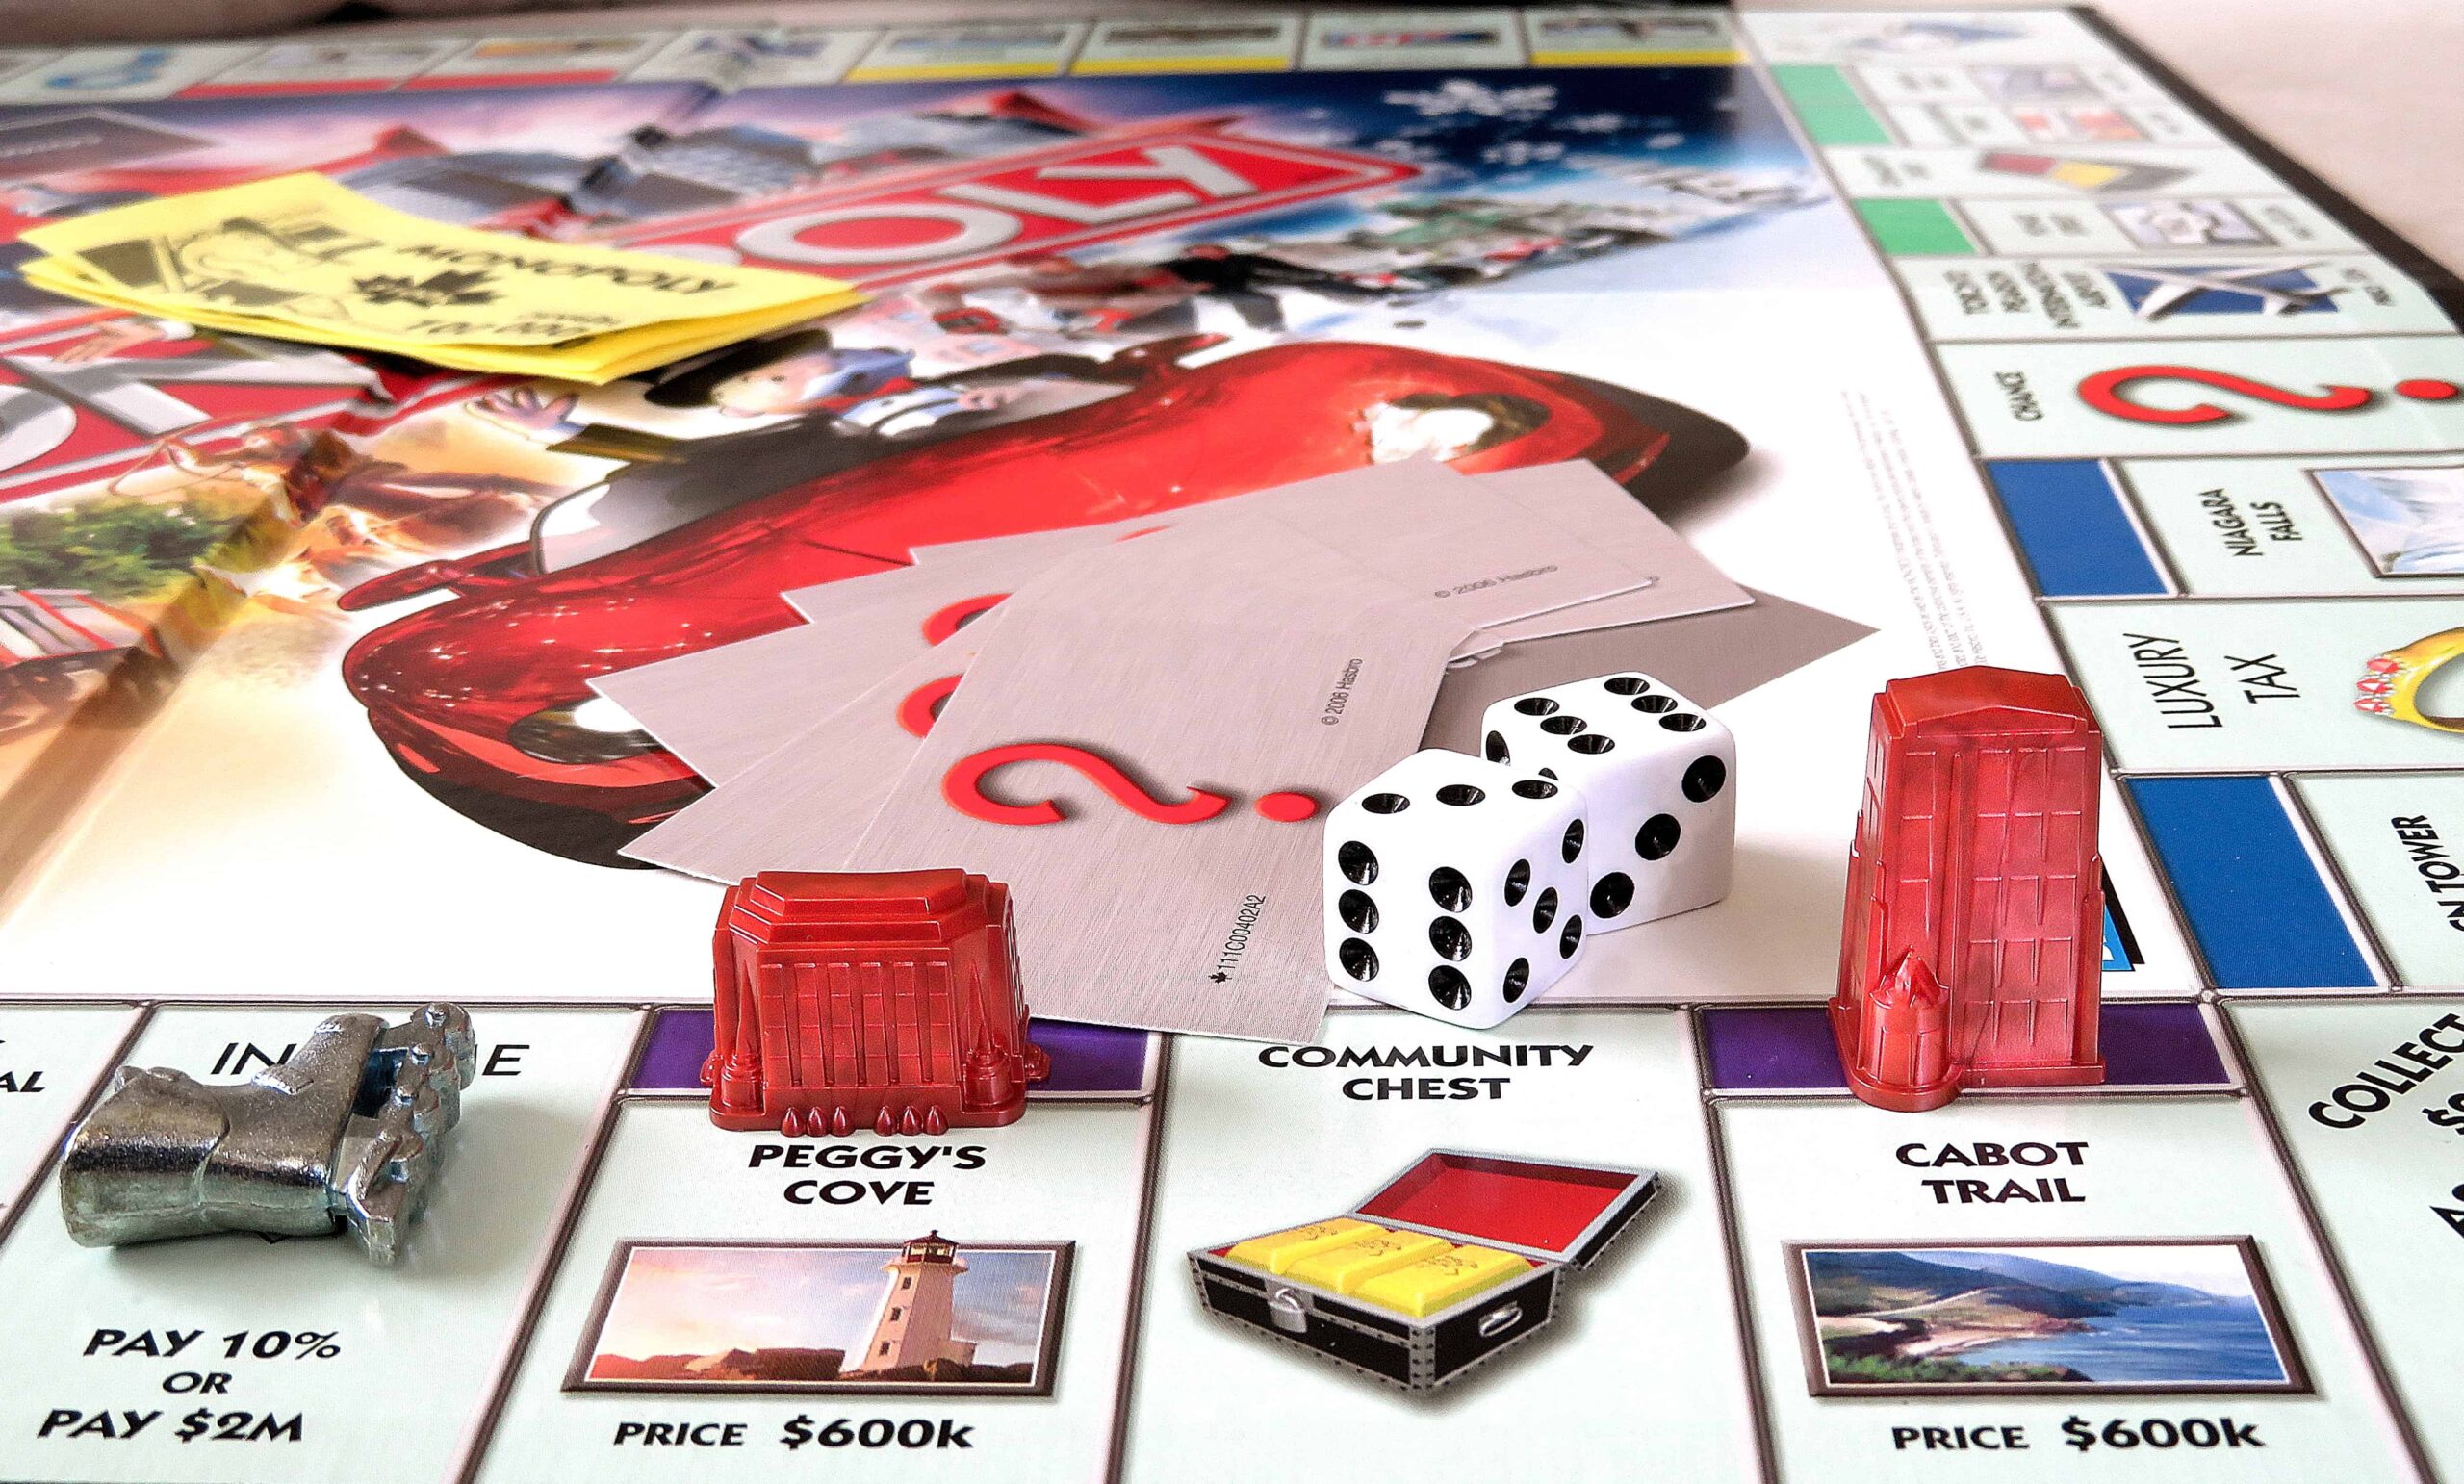 which one of the four railroads in monopoly was not a real railroad?